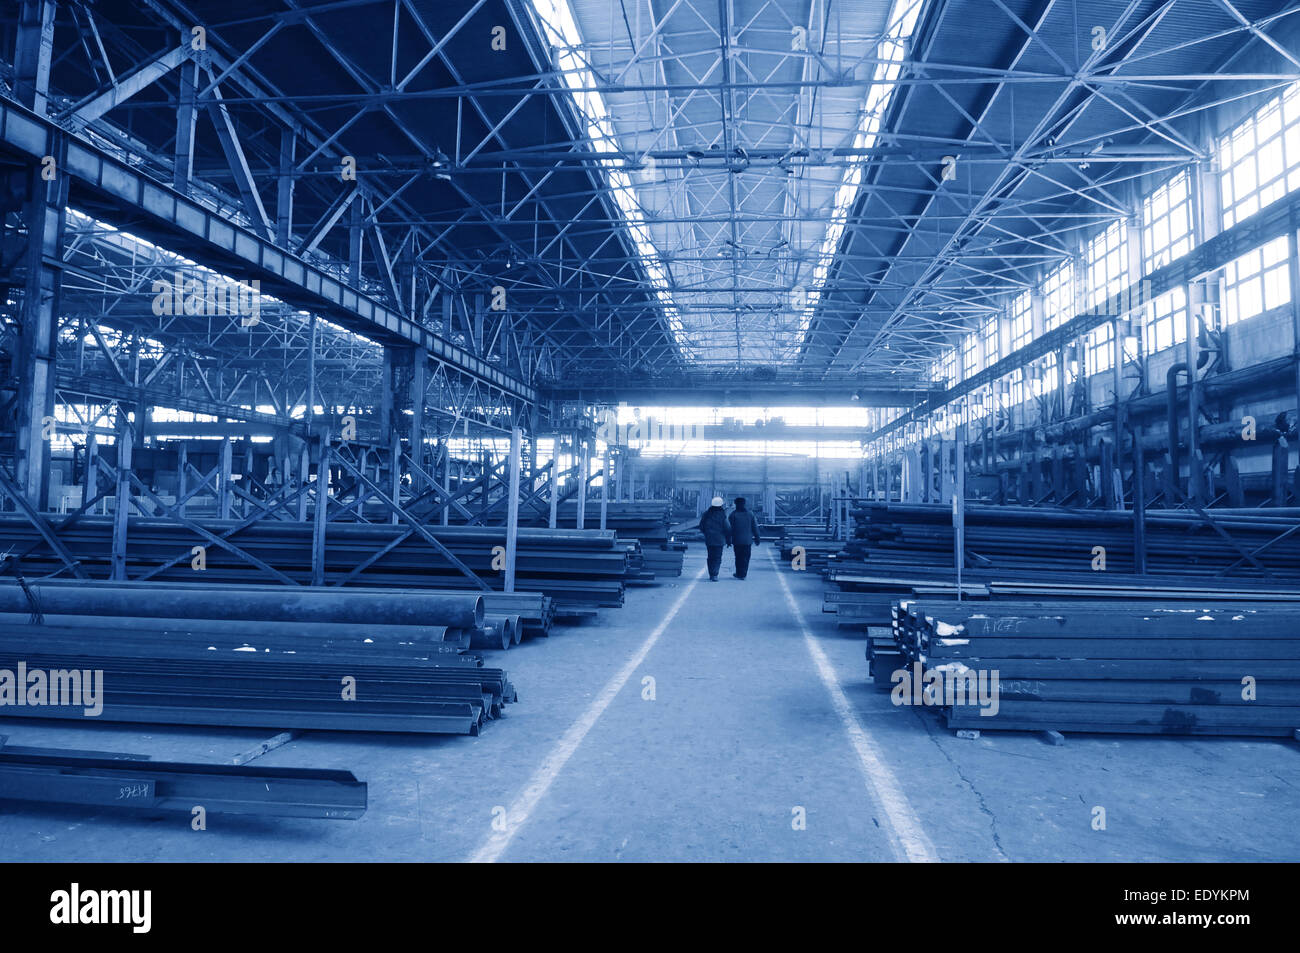 Rambling shop floor is made as steel construction. This production department make a specialty out of metalworks manufacturing. Stock Photo